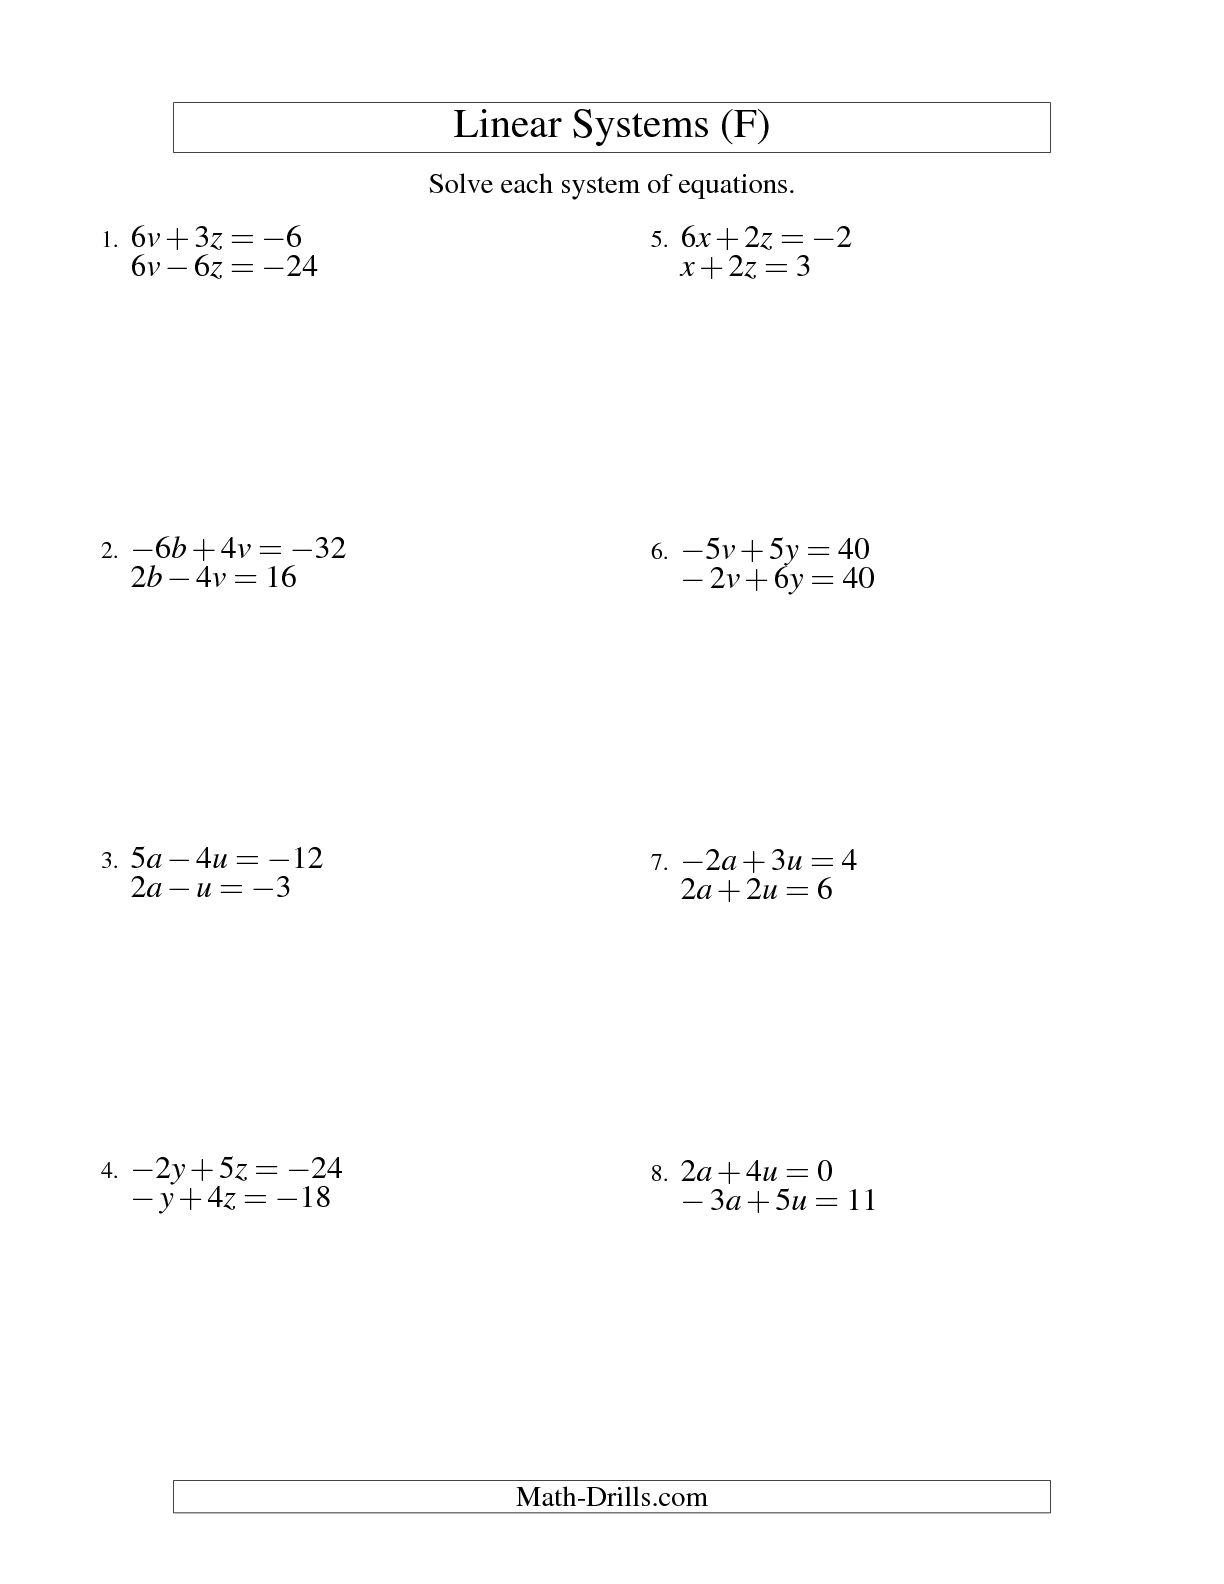 9-best-images-of-solving-equations-with-substitution-worksheet-solving-linear-equations-with